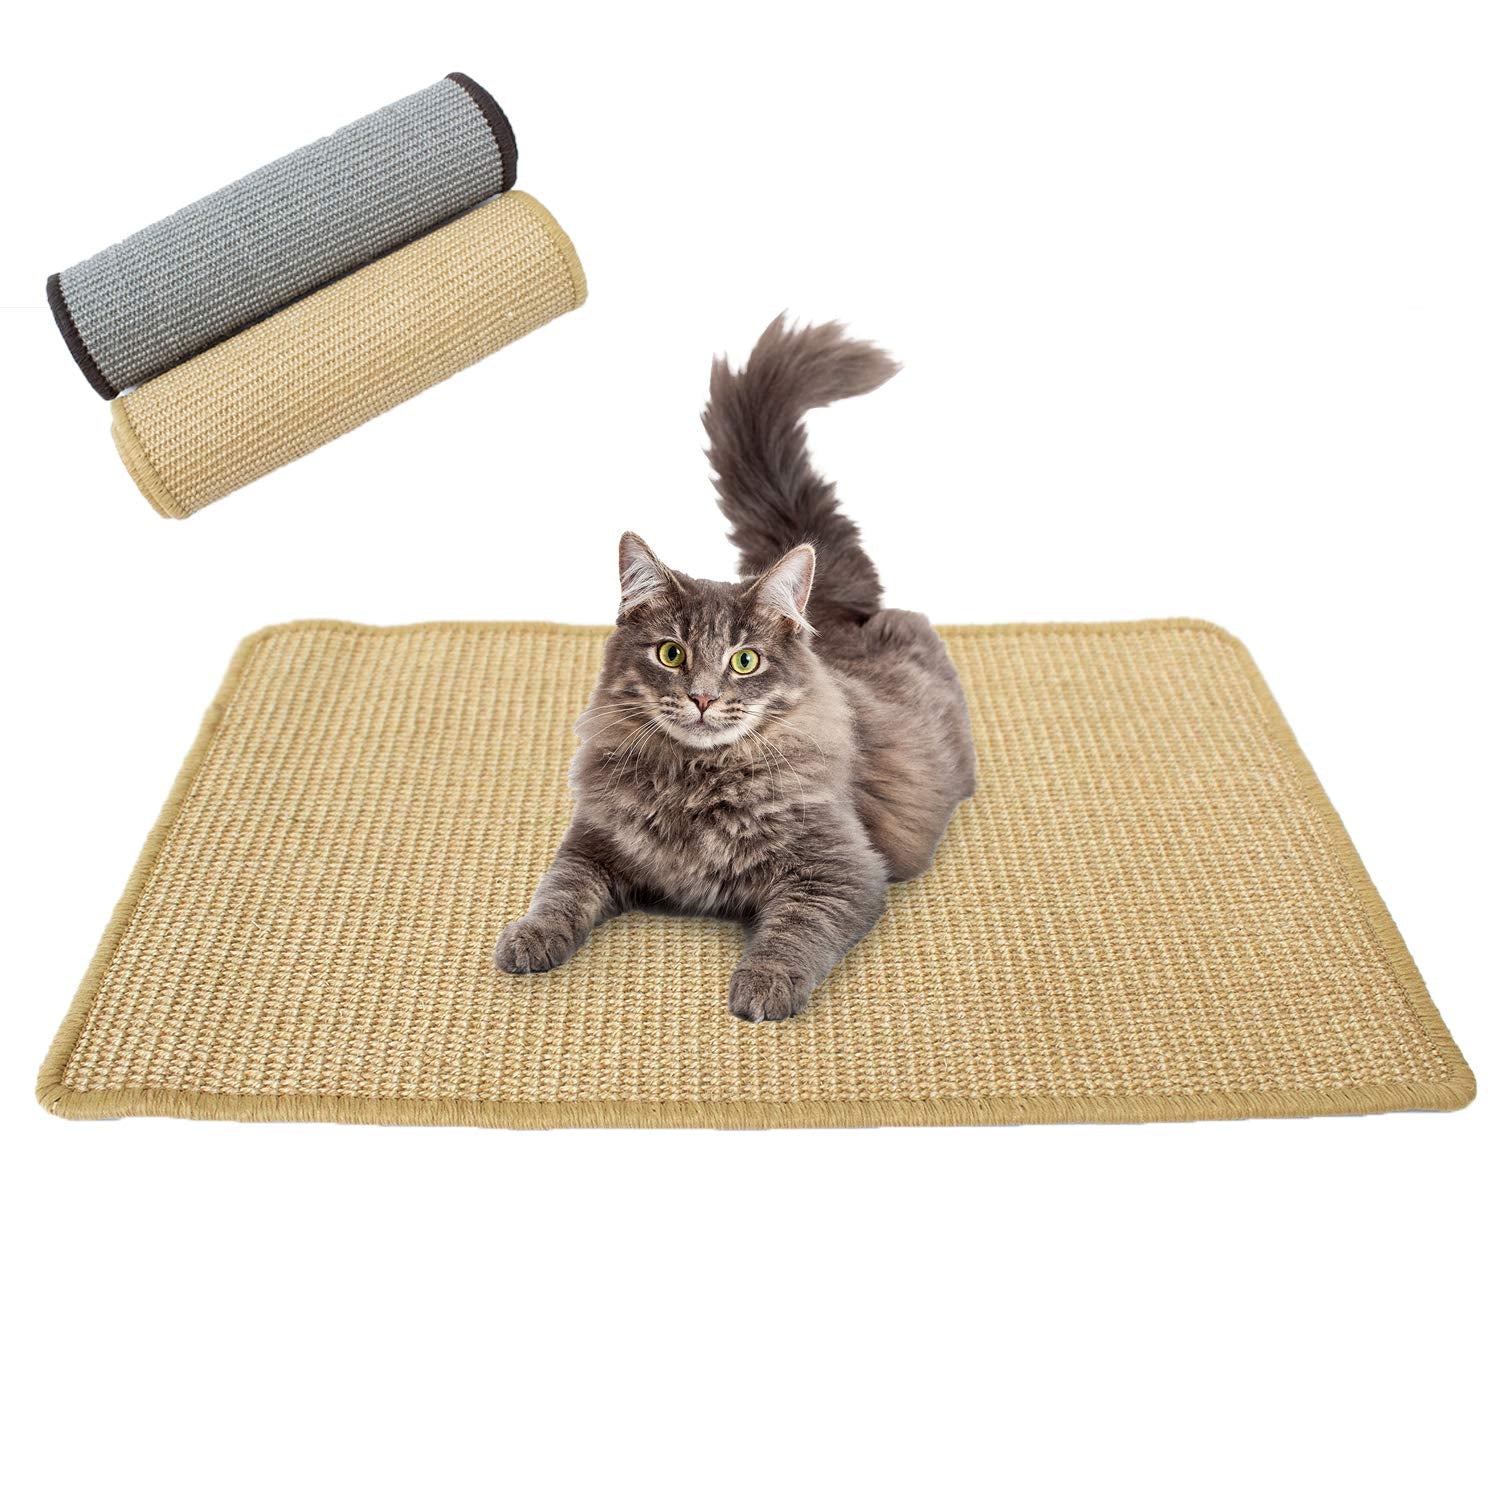 Downtown Pet Supply Natural Cat Scratching Mat with Premium Sisal, Exerciser Mat Toy for Kitty with Non Slip Backing Oatmeal, Small